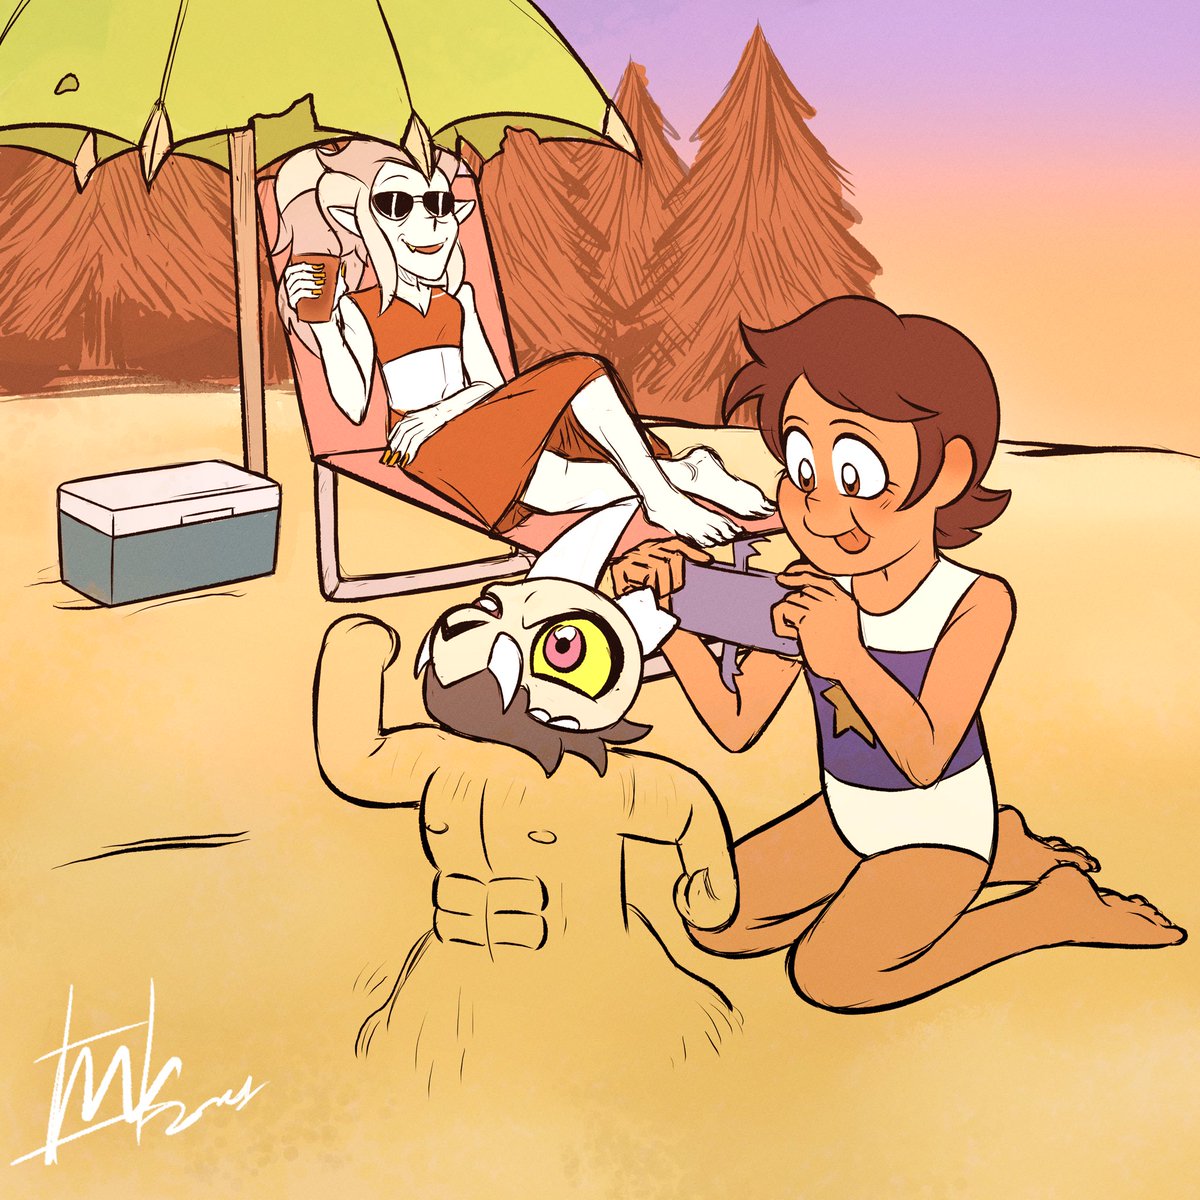 Hello everyone, wanted to tell you guys I’m going on a vacation! Won’t be back until Monday! Anyways, here’s a messy drawing I made of the trio at the beach ^^ 

#theowlhouse #theowlhouseseason2 #digitalart #myart #clipstudiopaint #messydrawing #theowlhouseeda #theowlhouseking